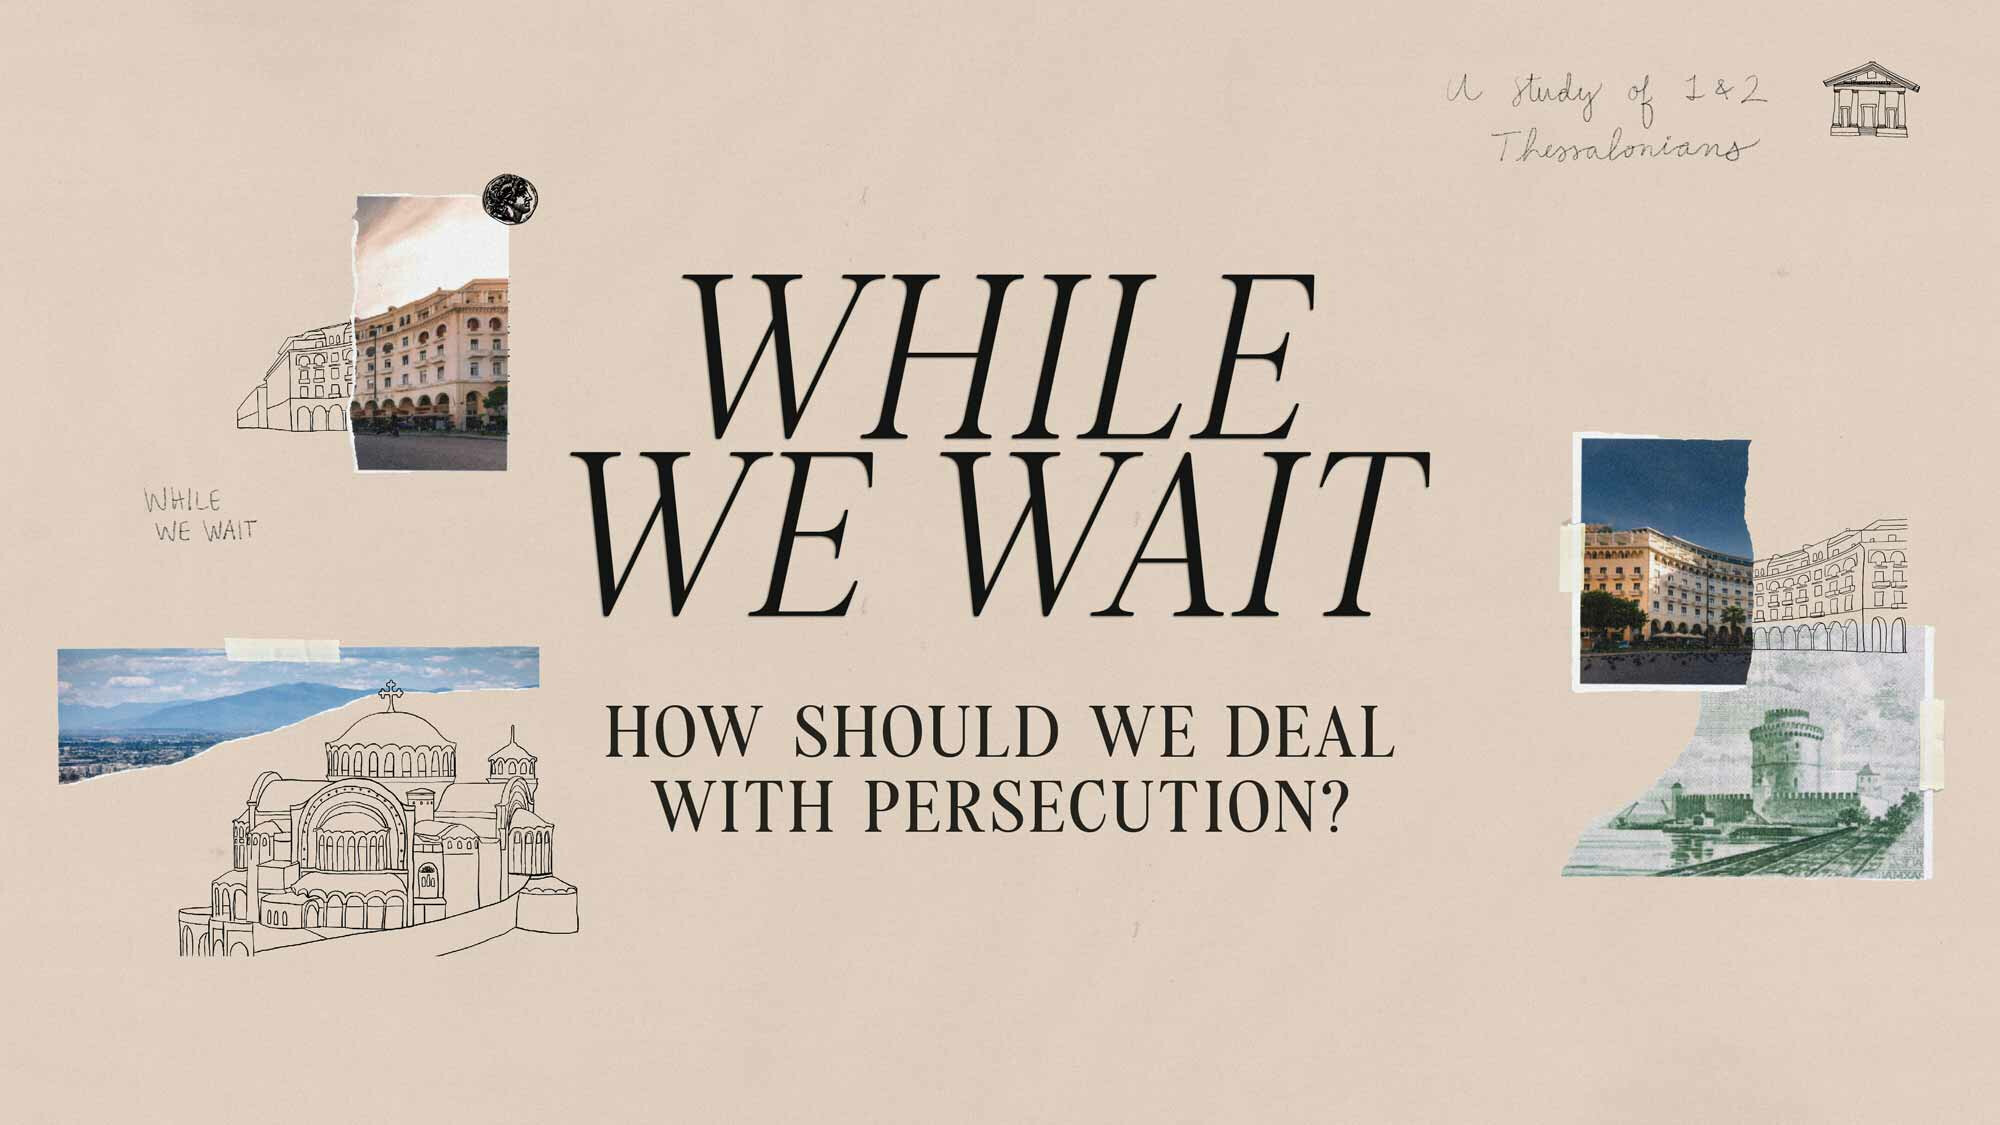 How should we deal with persecution?